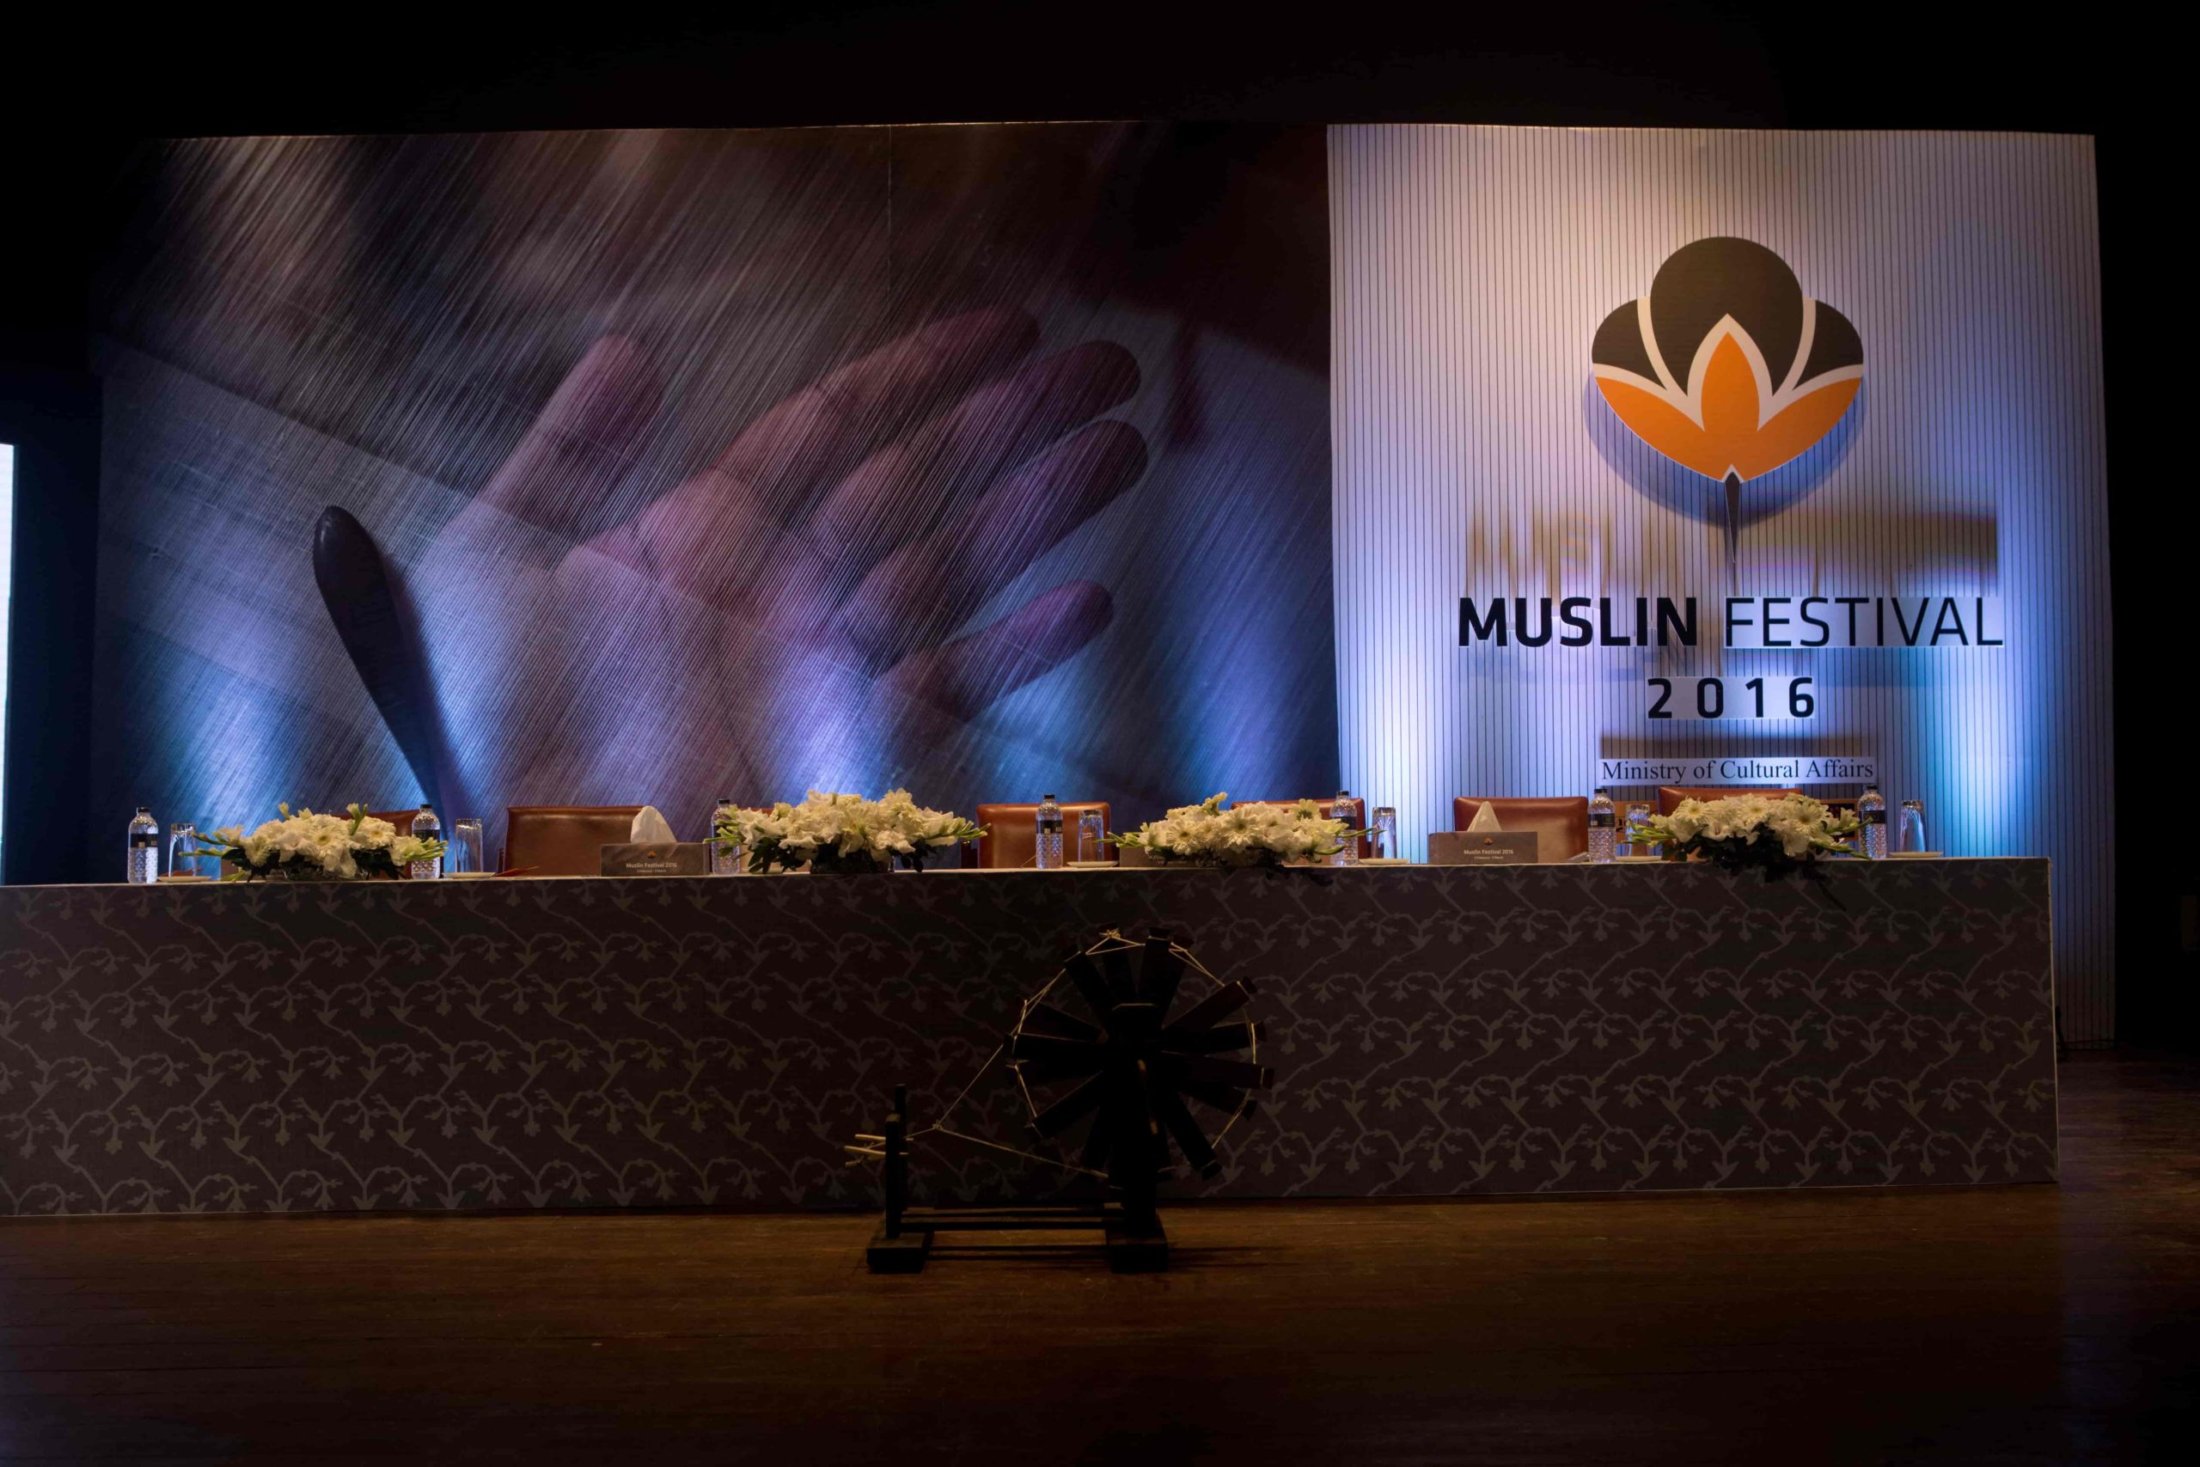 3. The stage is set for the Muslin Festival, 2016-min